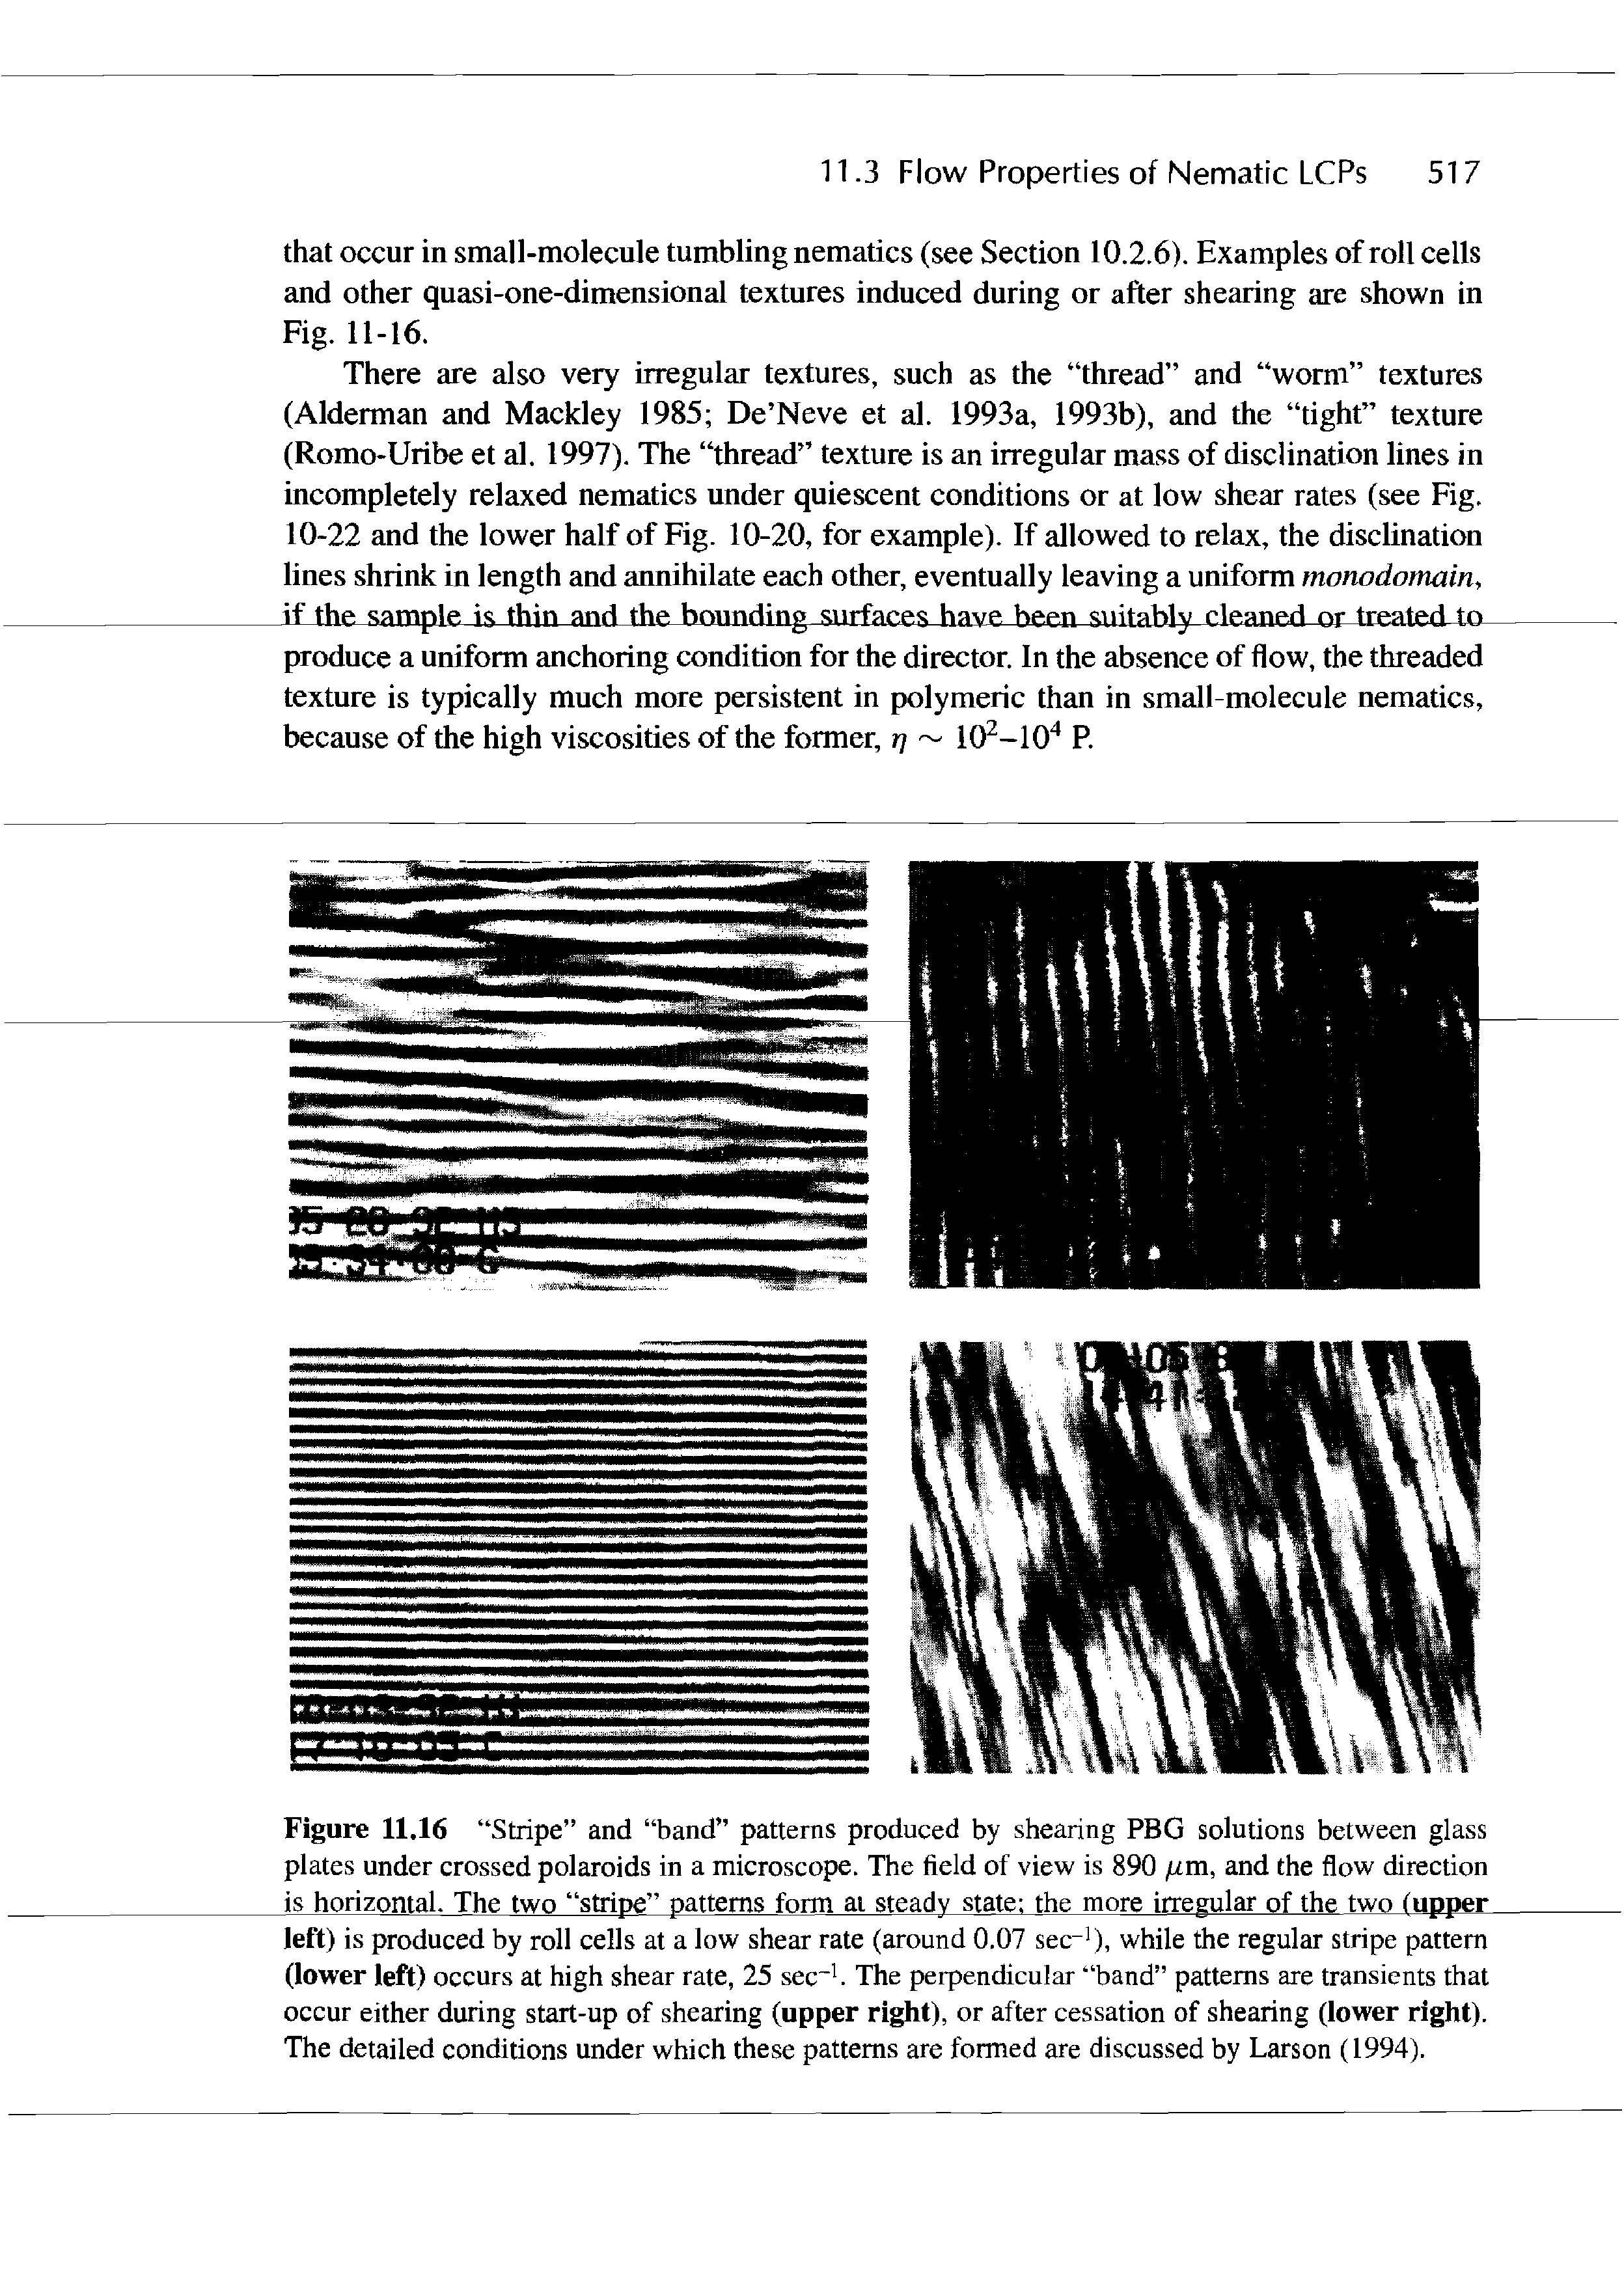 Figure 11.16 Stripe and band patterns produced by shearing PBG solutions between glass plates under crossed polaroids in a microscope. The field of view is 890 m, and the flow direction is horizontal. The two stripe patterns form at steady state the more irregular of the two (upper left) is produced by roll cells at a low shear rate (around 0.07 sec ), while the regular stripe pattern (lower left) occurs at high shear rate, 25 sec. The perpendicular band patterns are transients that occur either during start-up of shearing (upper right), or after cessation of shearing (lower right). The detailed conditions under which these patterns are formed are discussed by Larson (1994).